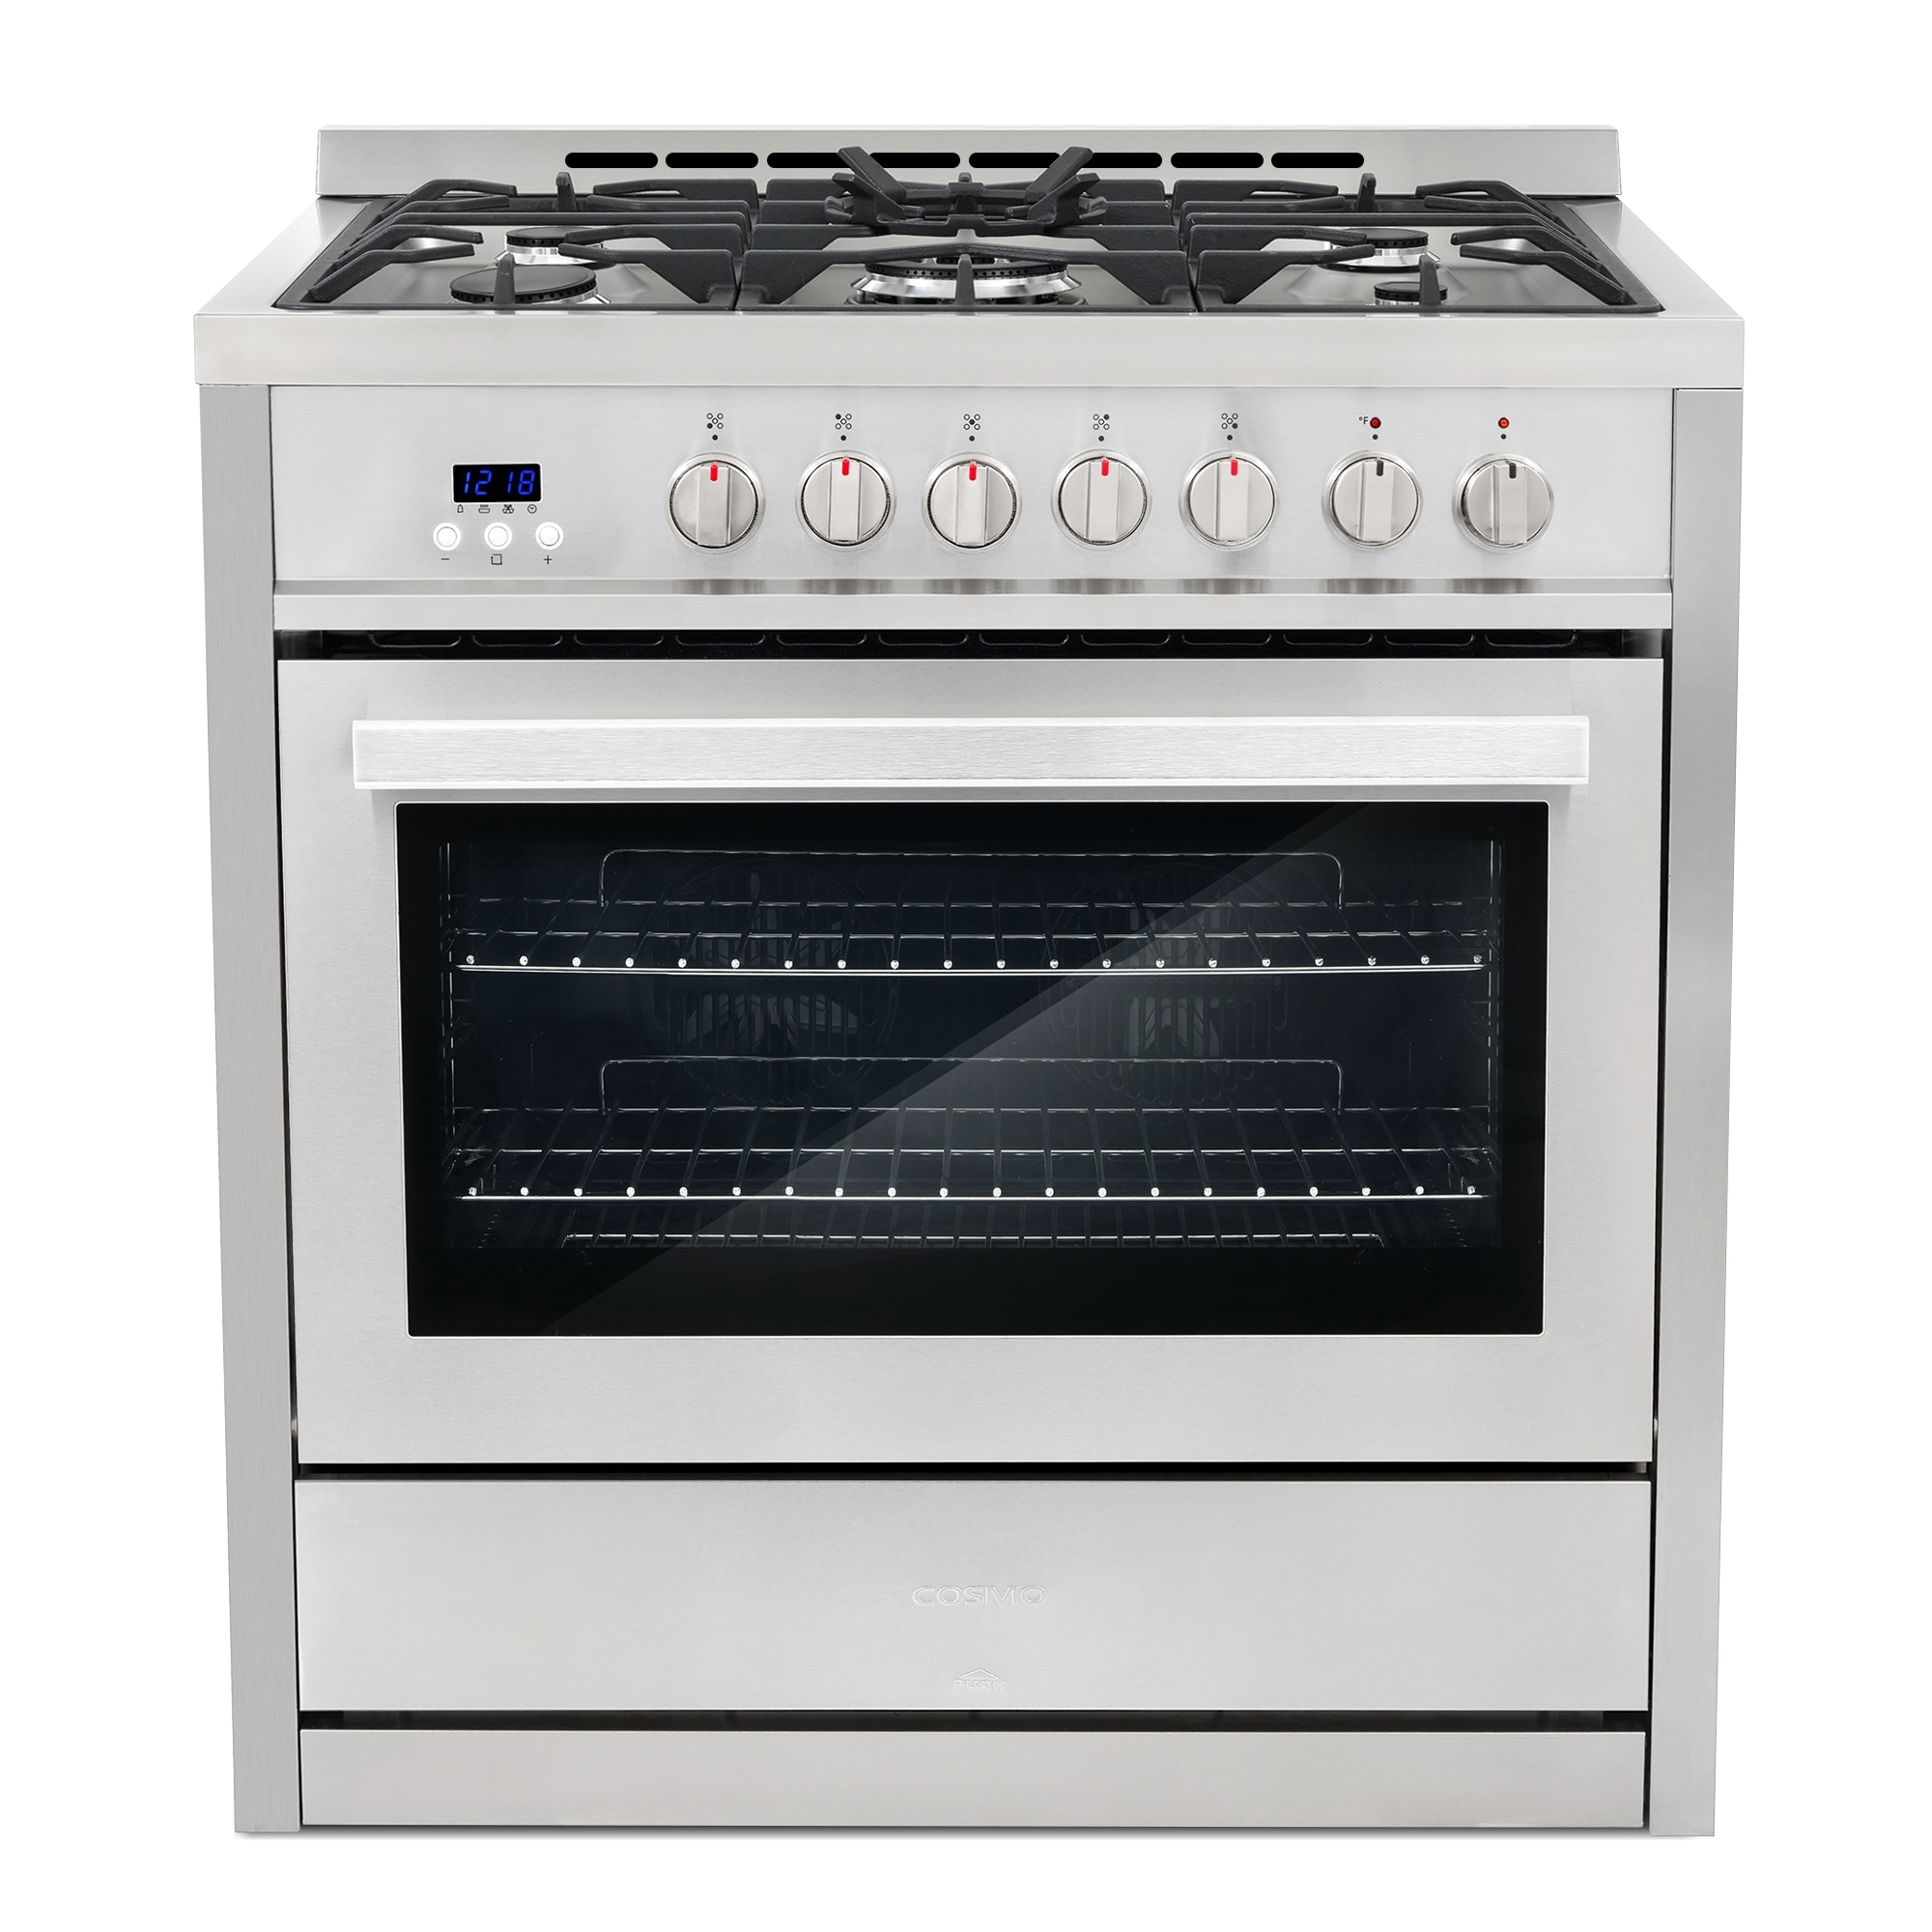 Lanbo 2.9 Cu.Ft Freestanding Electric Range with Air Fry Function,  Stainless Steel